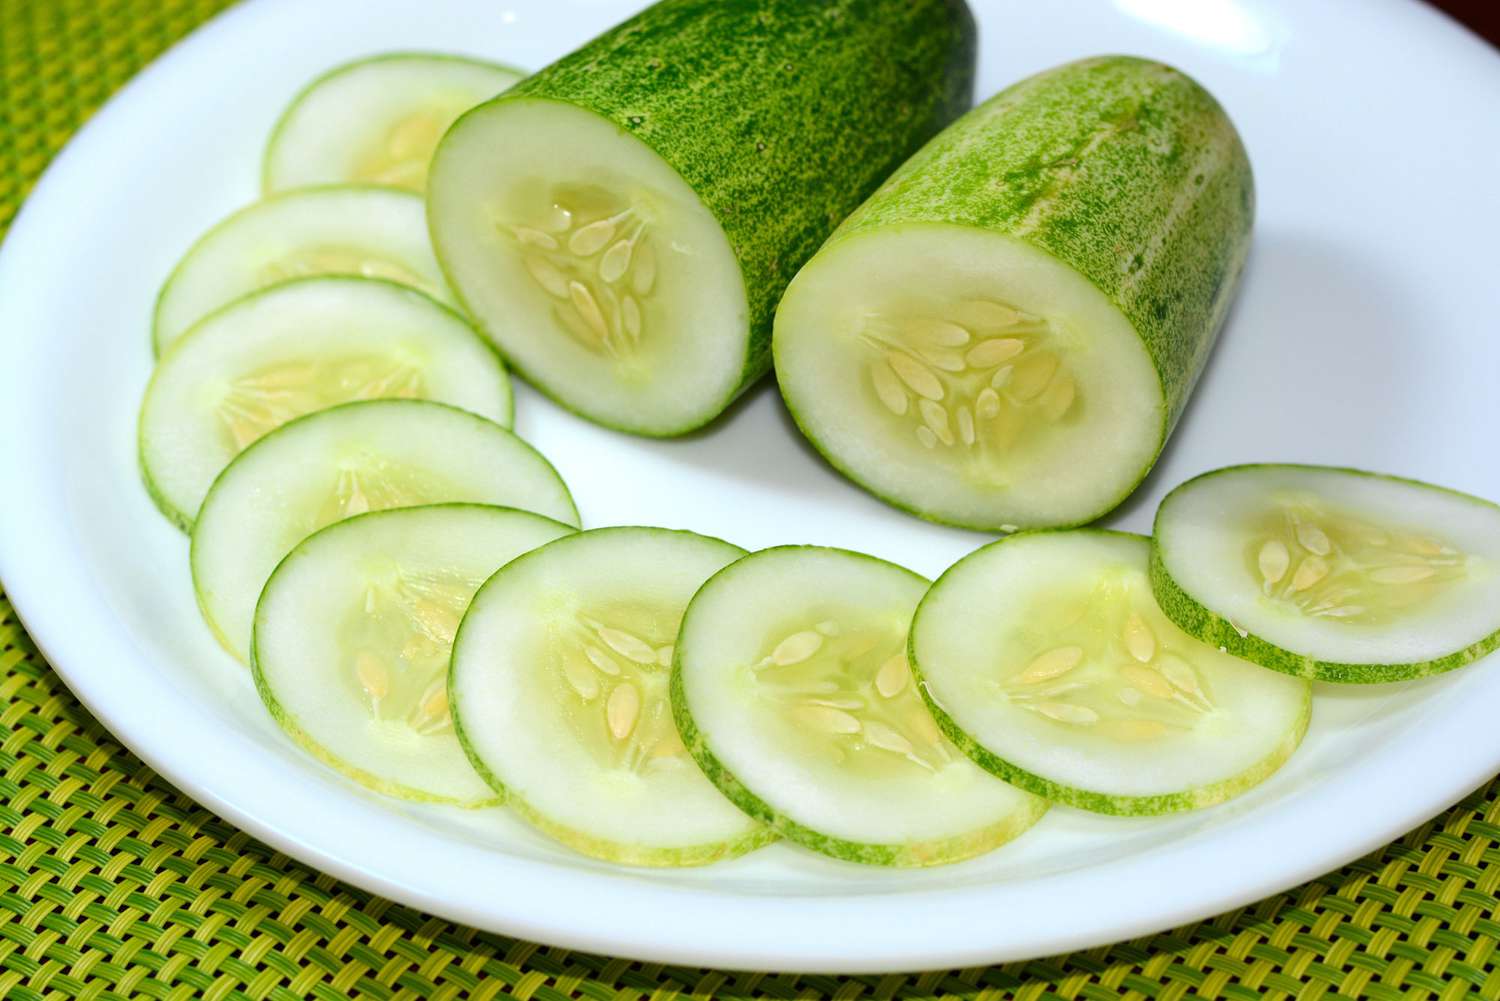 what-is-the-difference-between-pickling-cucumbers-vs-regular-cucumbers